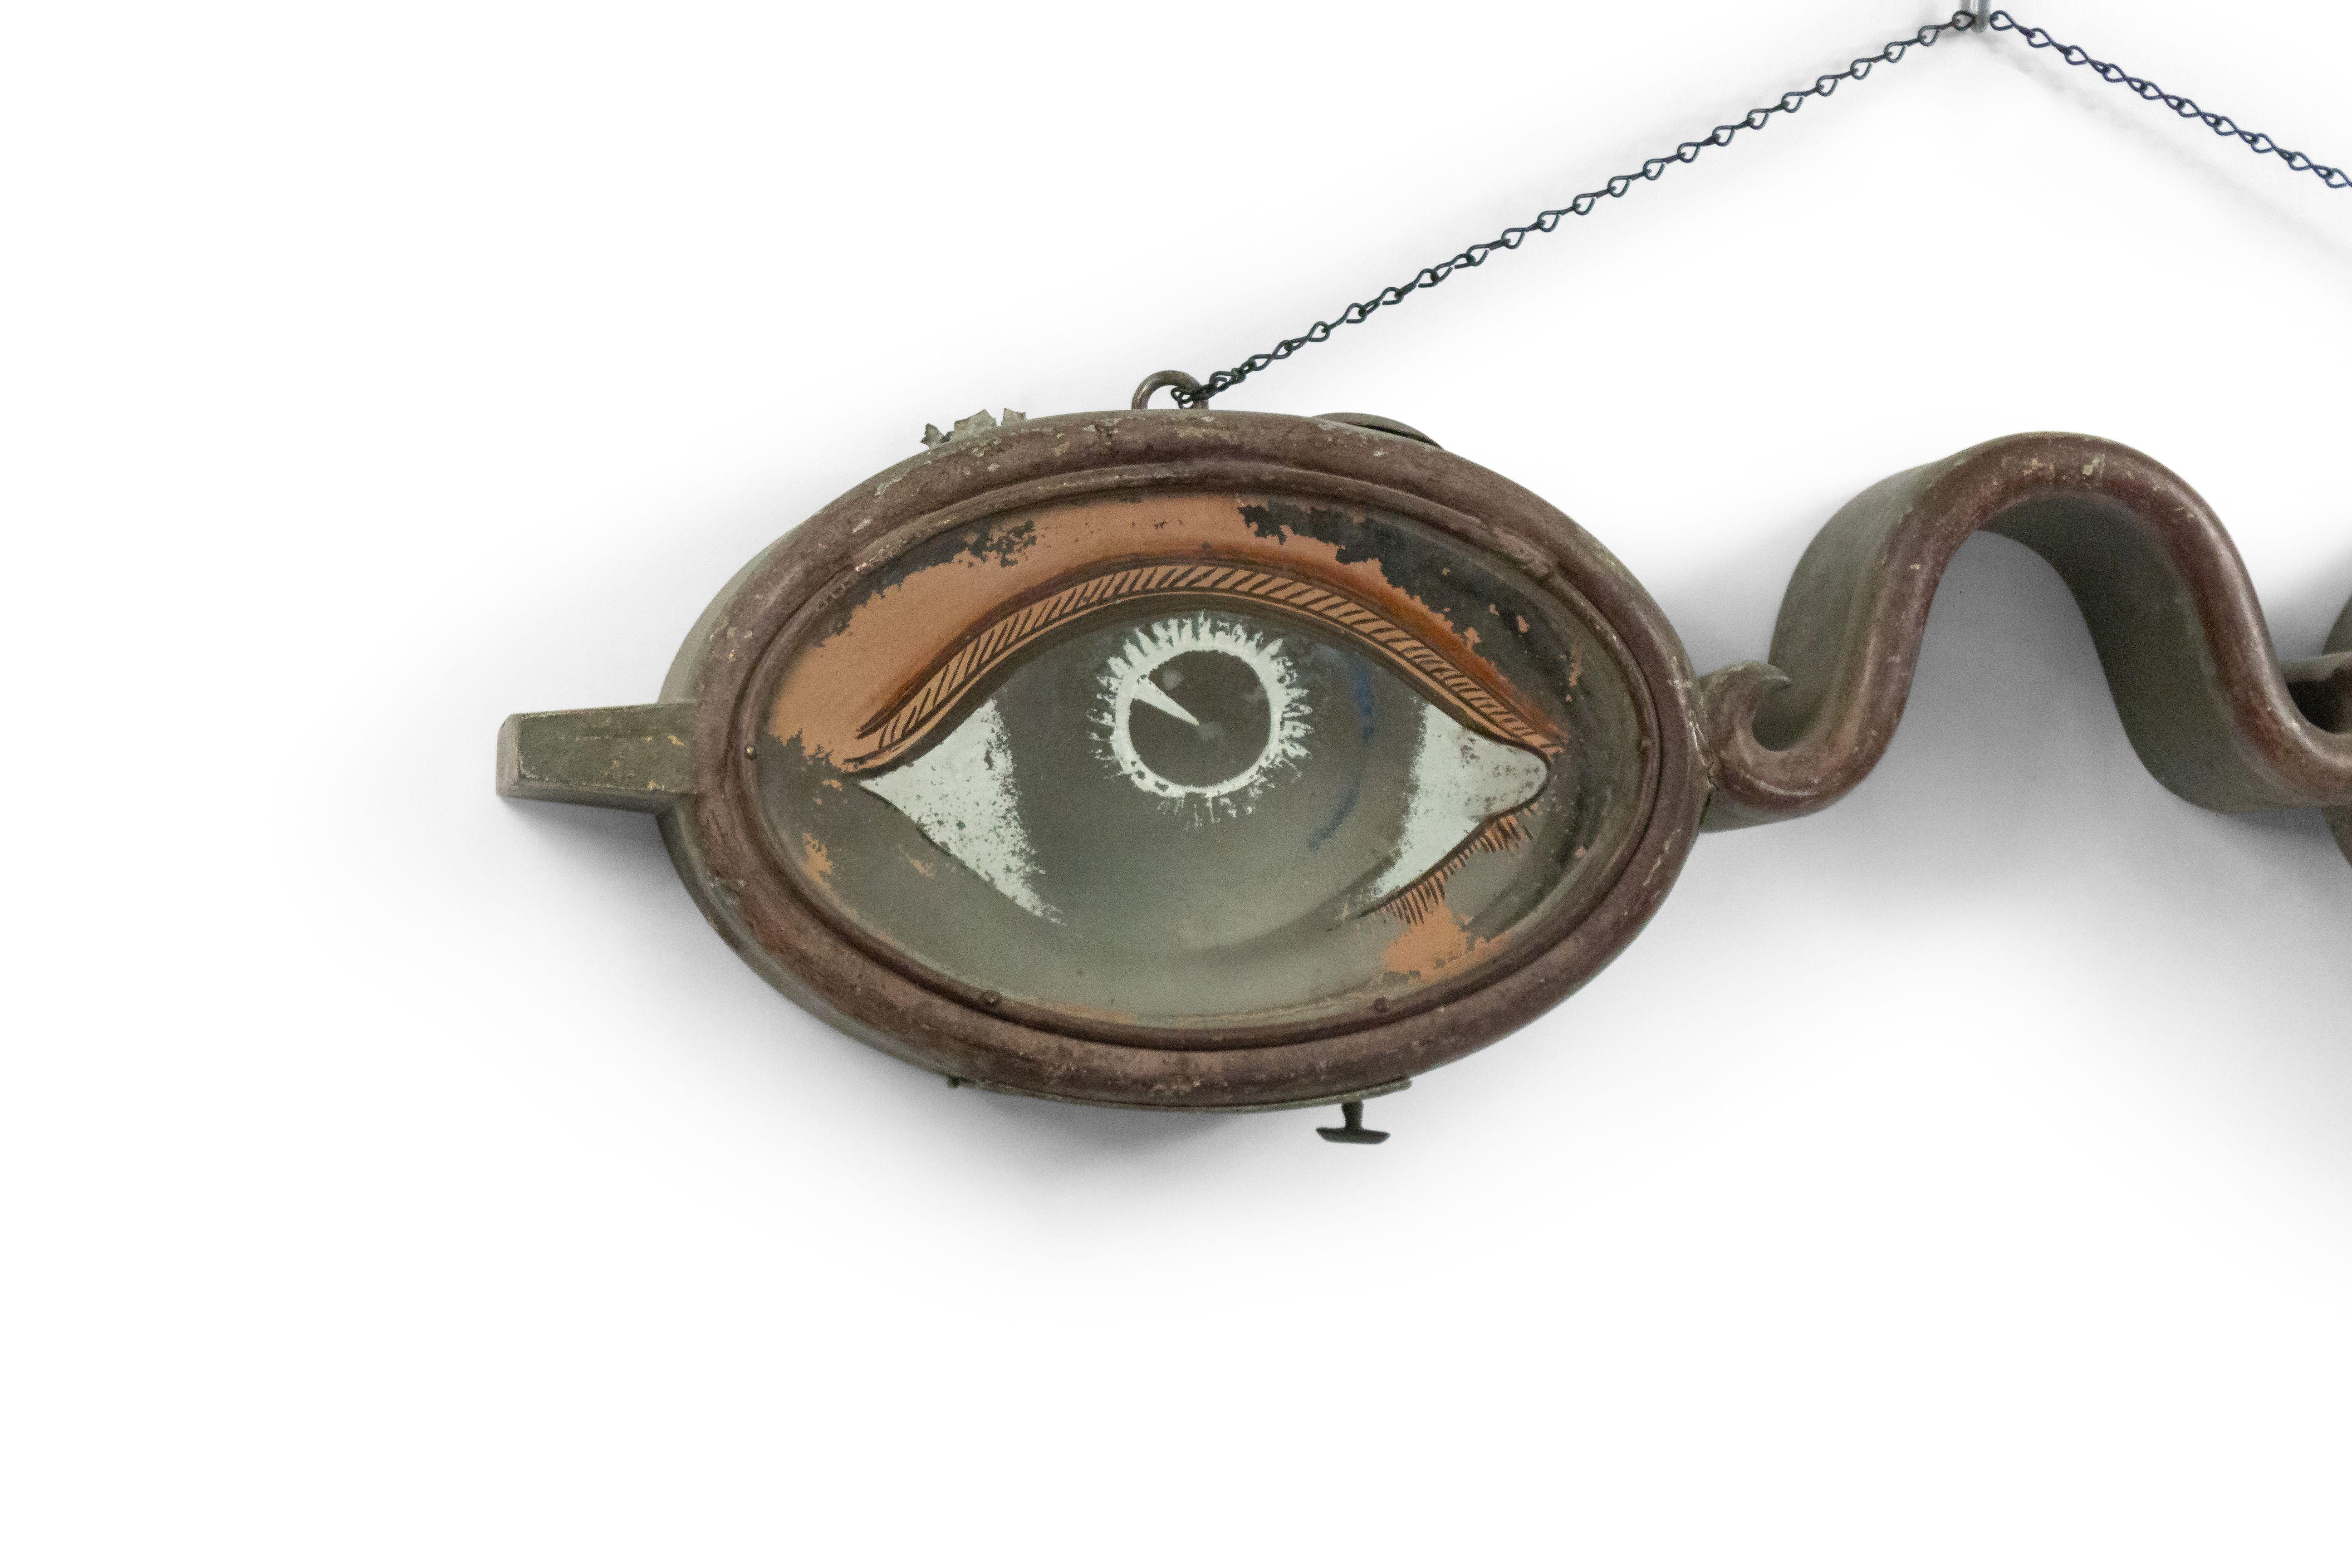 English folk art (19th century) painted tole and glass hanging eye glass trade sign.
 